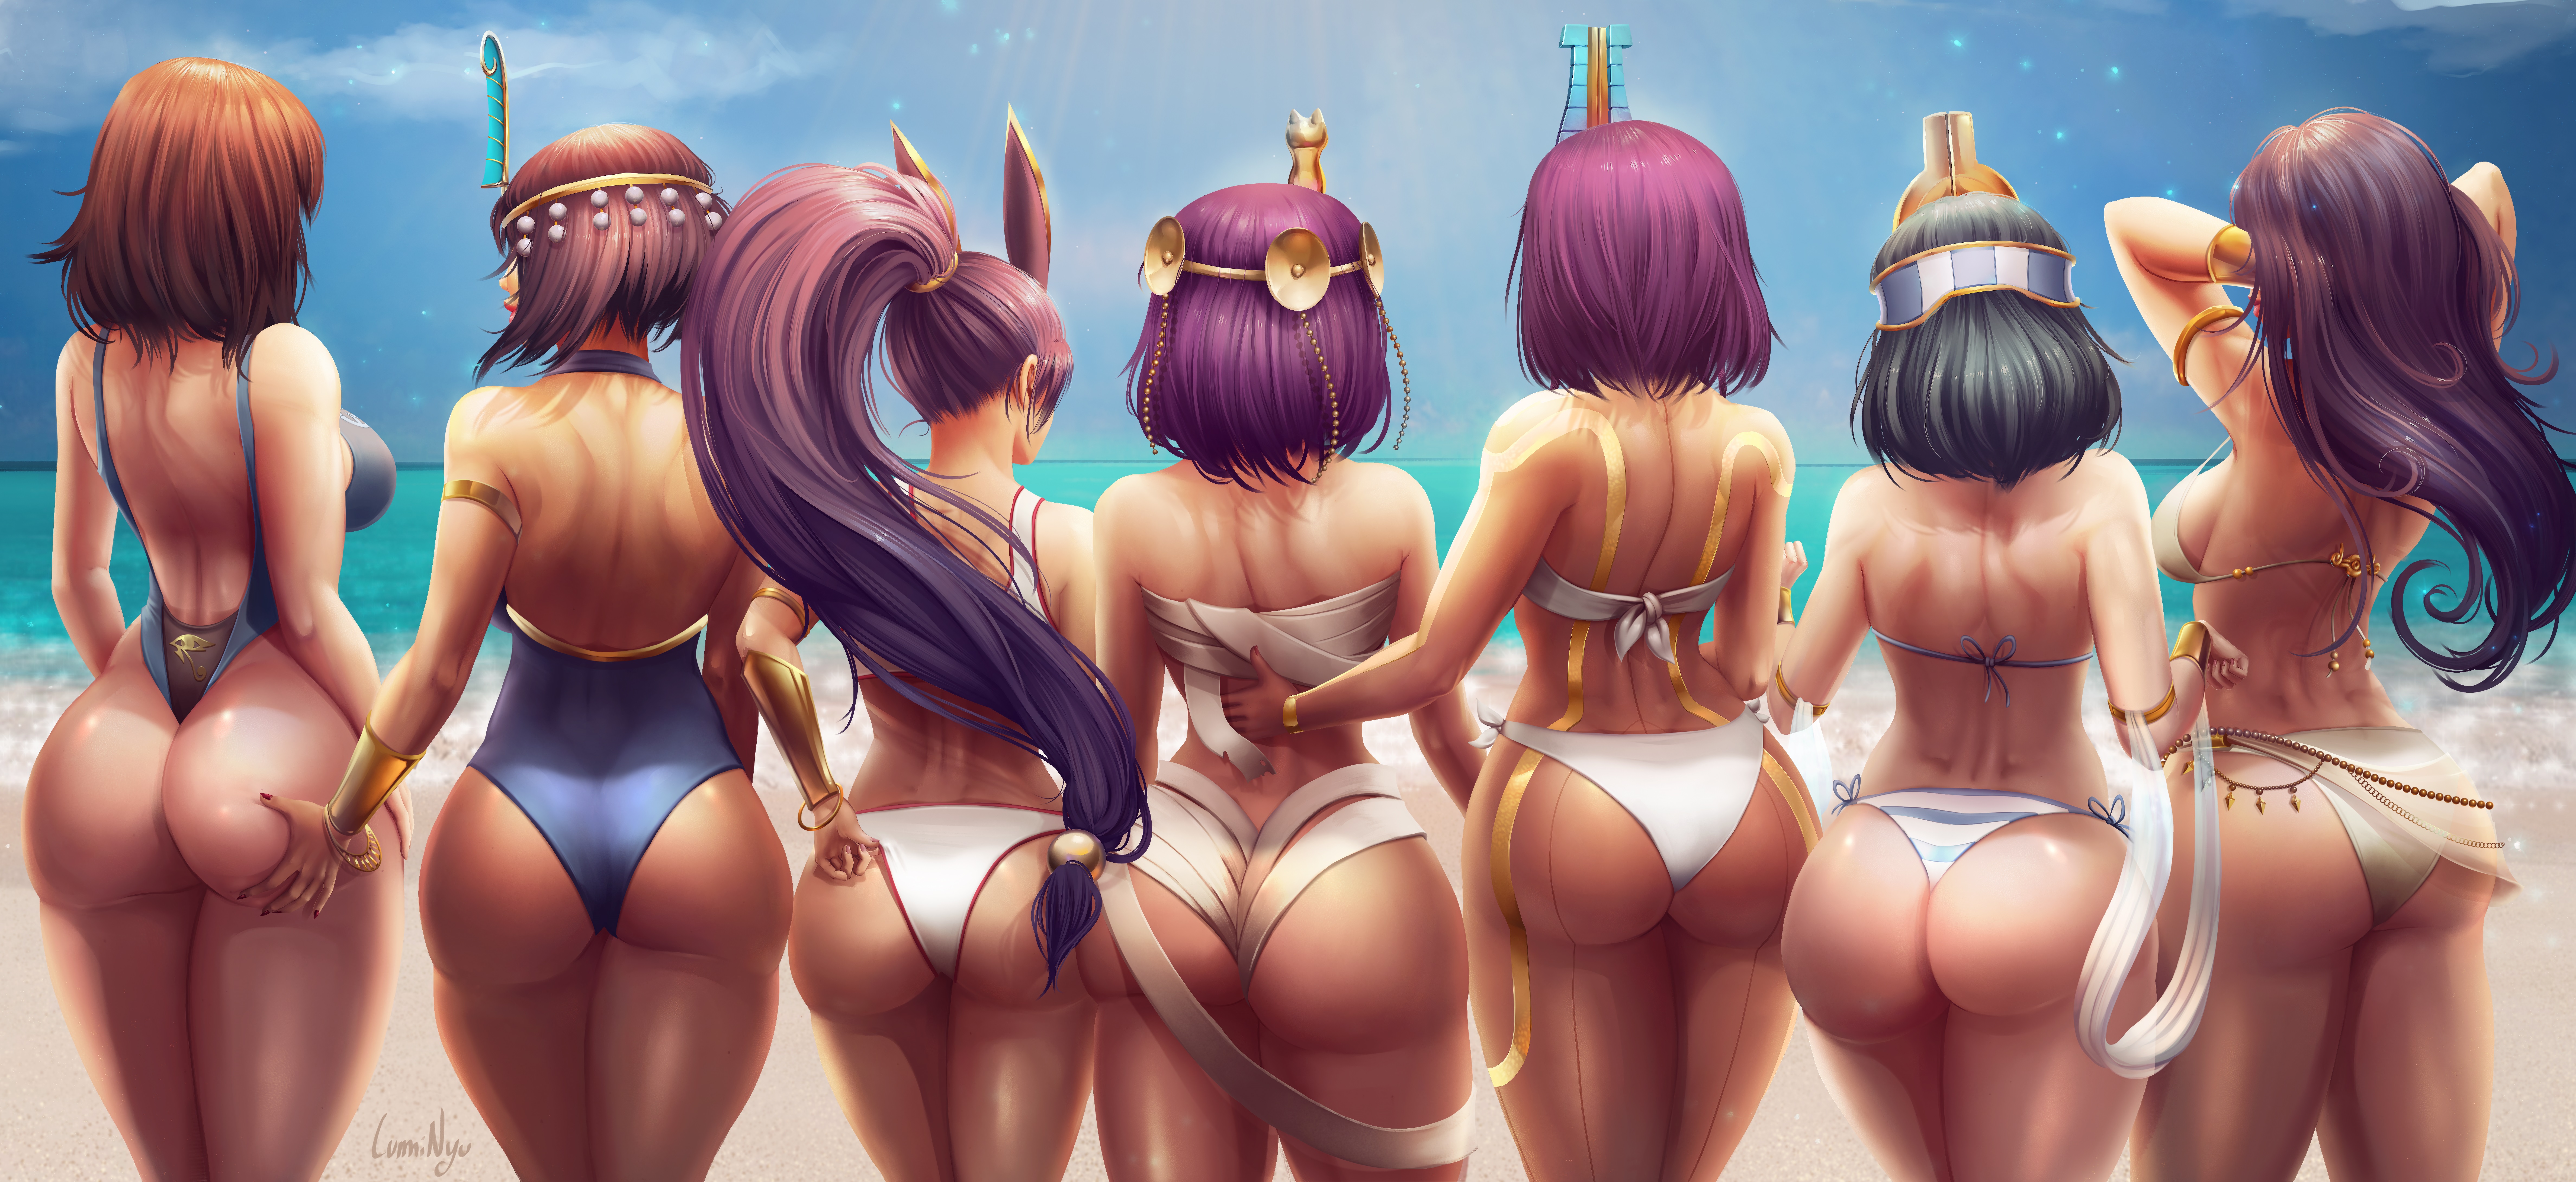 Anime 9502x4360 Pharah (Overwatch) Eliza Nitocris (Fate/Grand Order) Menat Neith (Smite) Menace (Queen's Blade) Ishizu Ishtar Overwatch Skullgirls Fate/Grand Order Street Fighter Smite Queen's Blade video games video game girls anime anime girls crossover behind summer Egyptian Egyptian mythology swimwear bikini ass curvy 2D artwork drawing illustration fan art LumiNyu thick thigh ass grab group of asses group of women oriental line-up back bright